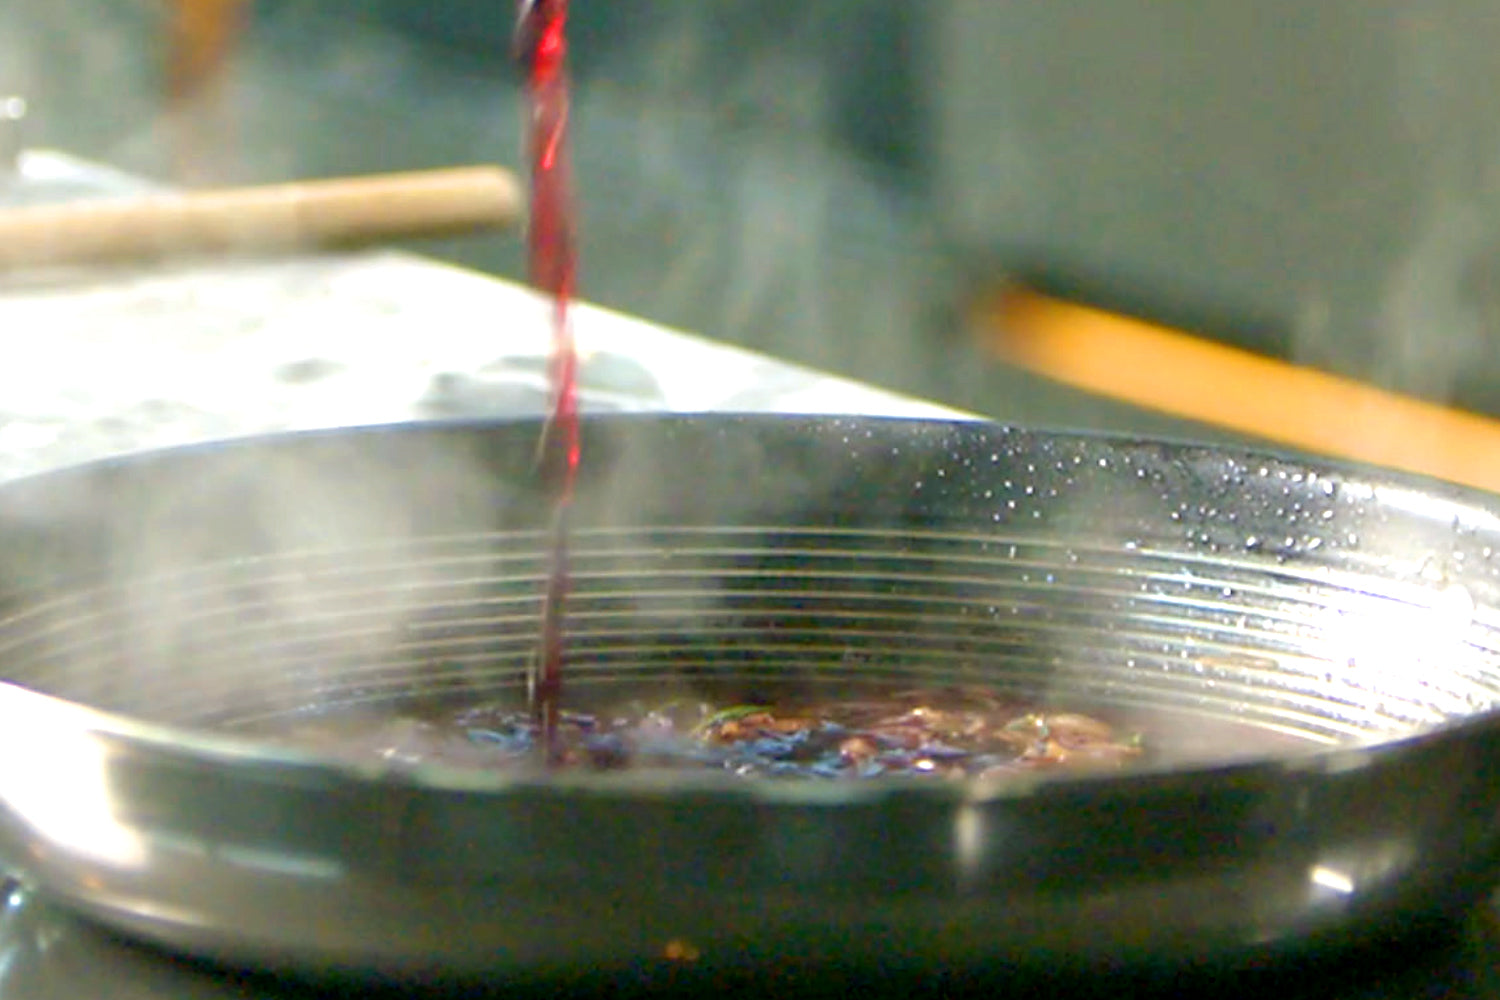 Adding red wine to a sauce